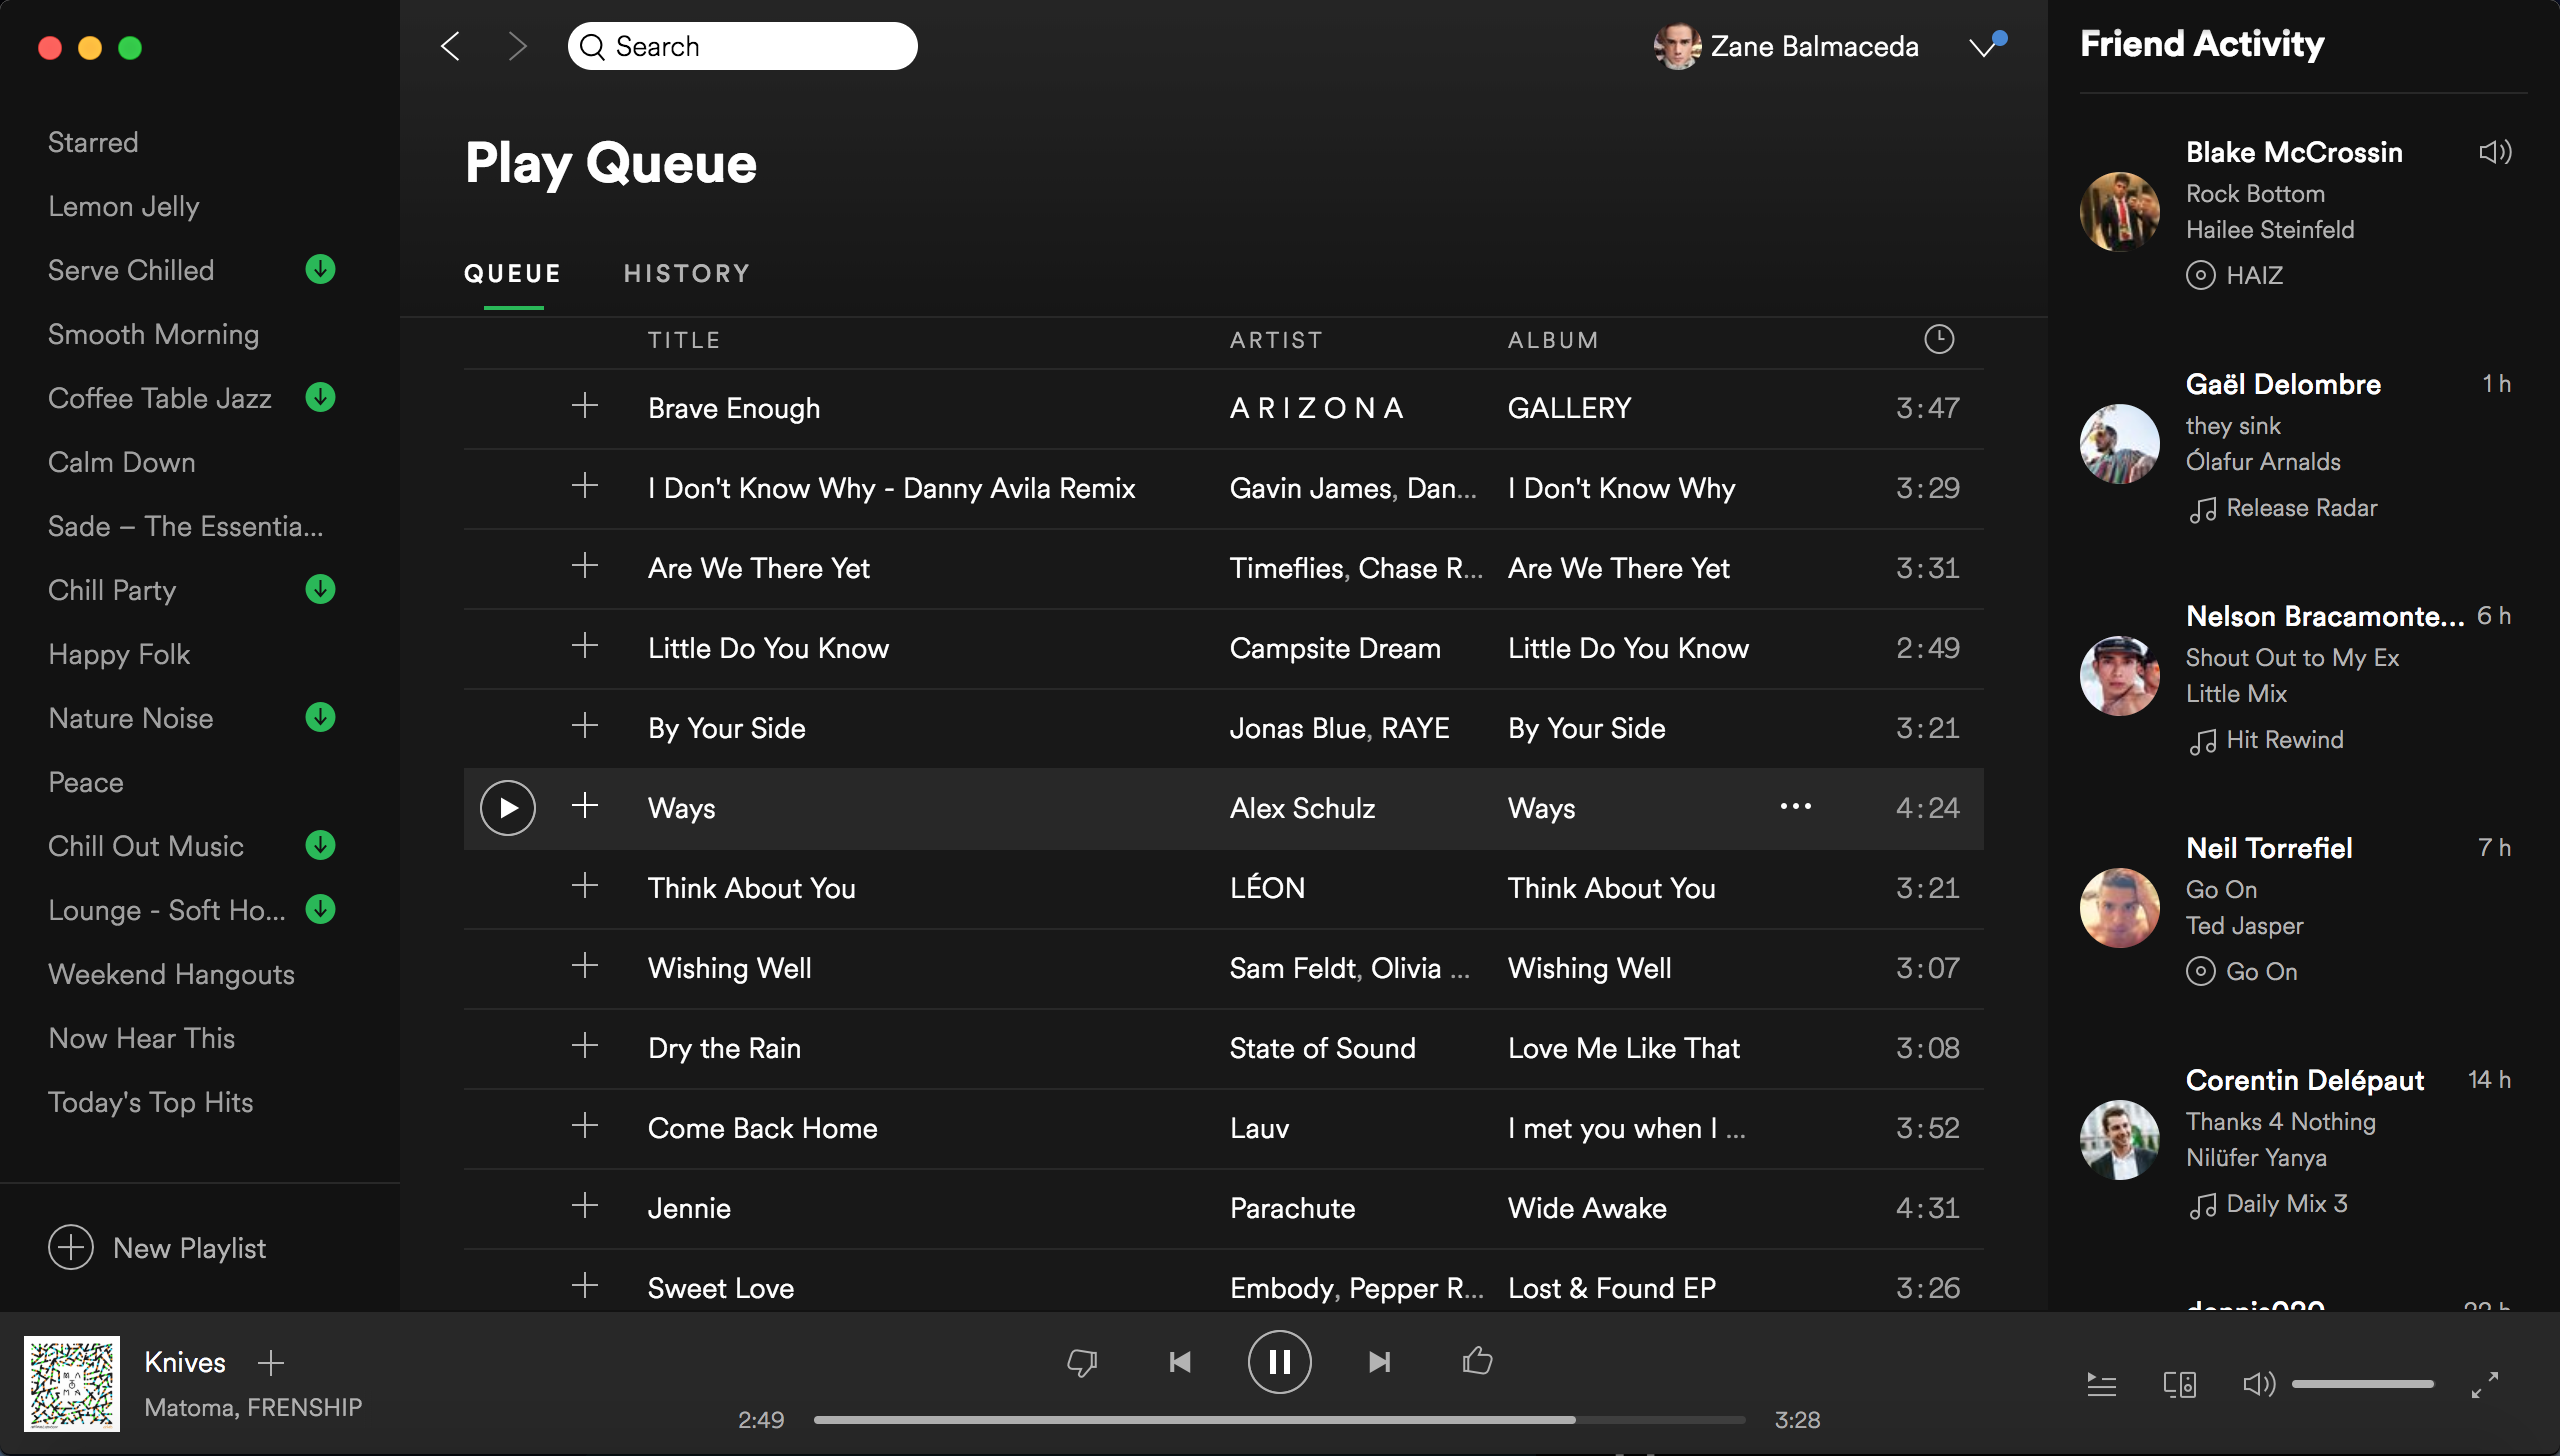 How to Put a Song on Repeat on Spotify